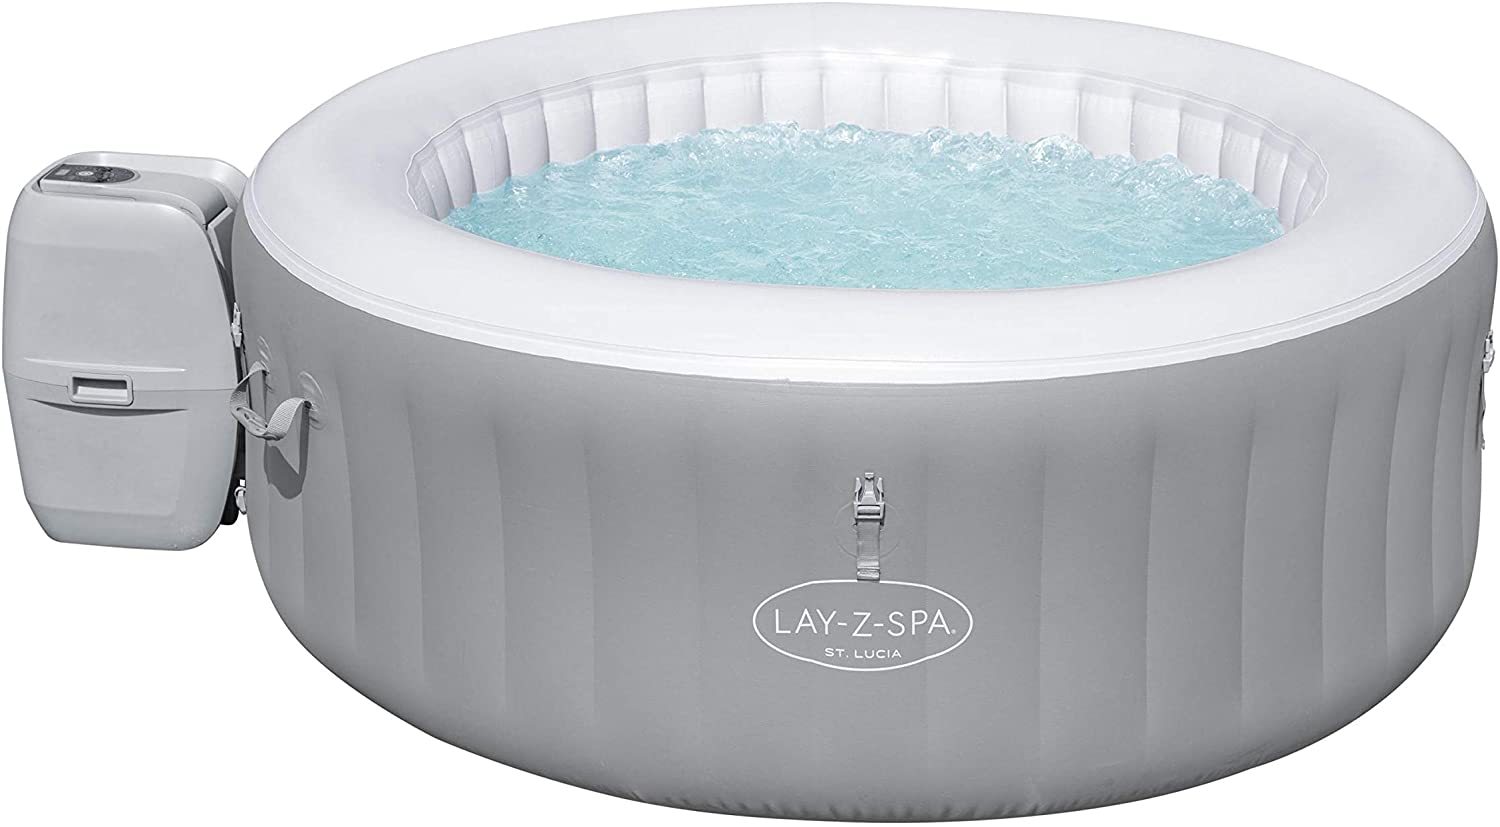 lay-z-spa st lucia